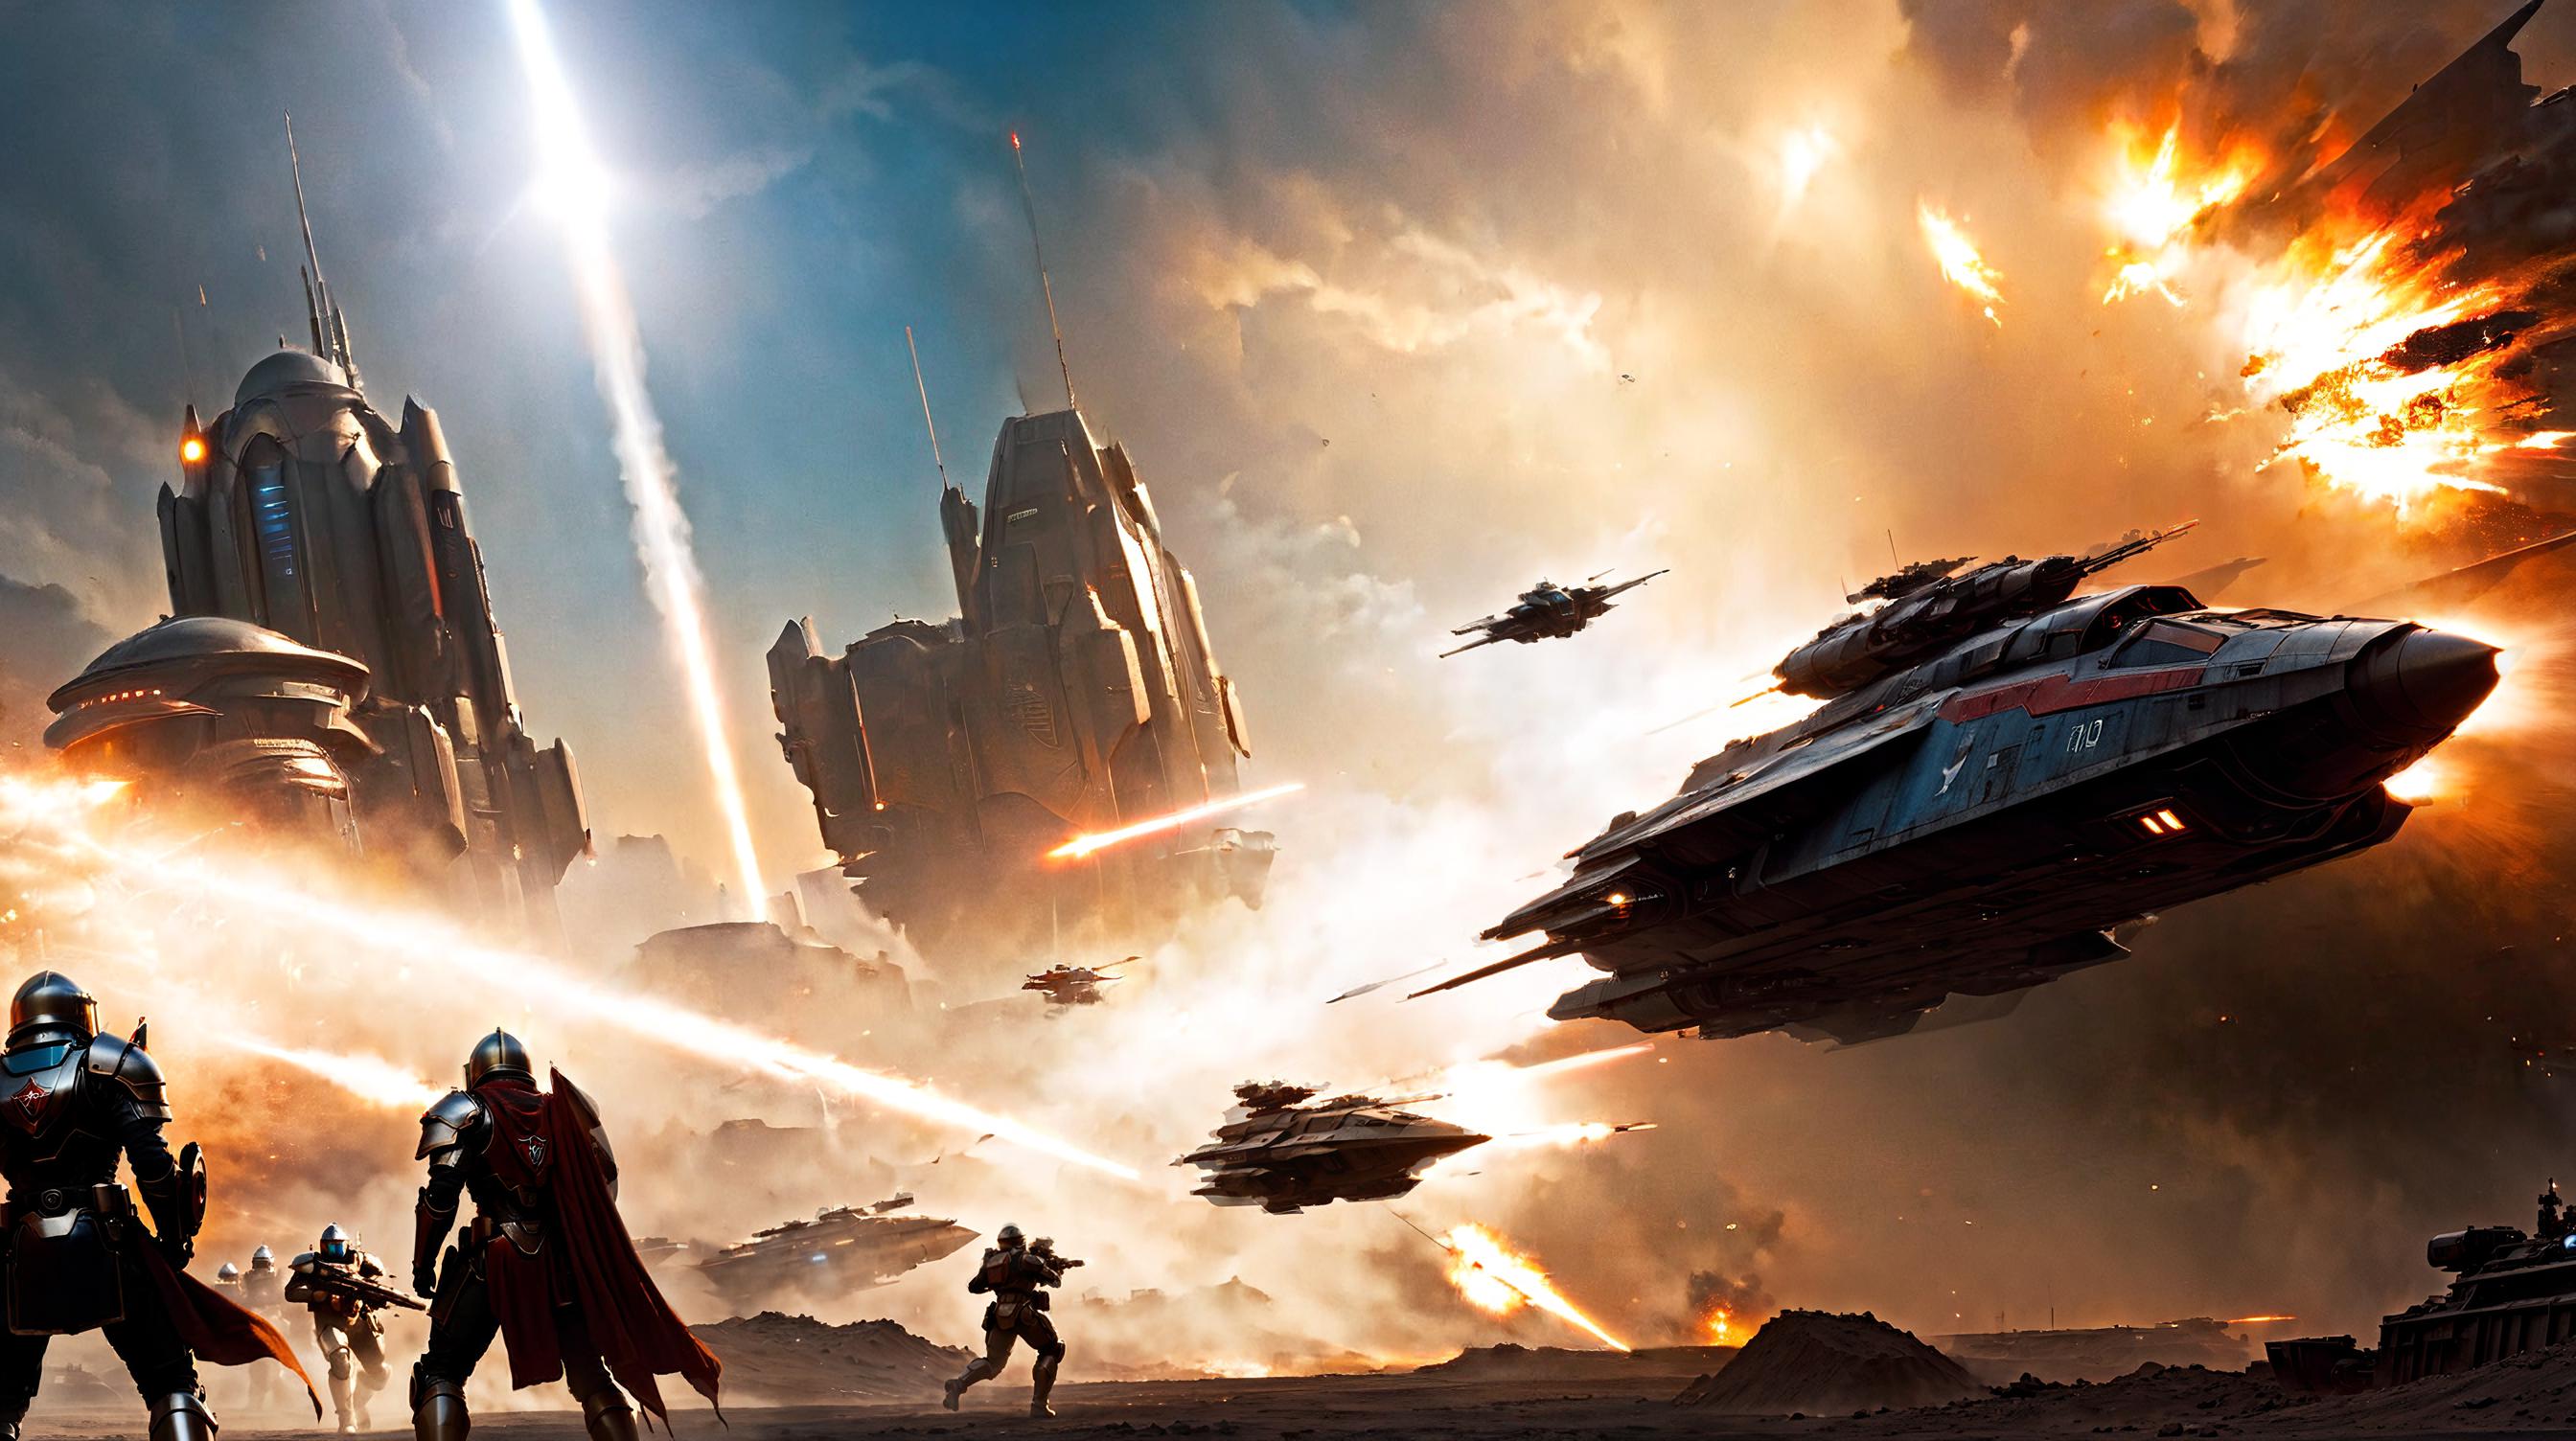 A Space Battle with Multiple Fighters and Ships in a Blue Sky Background